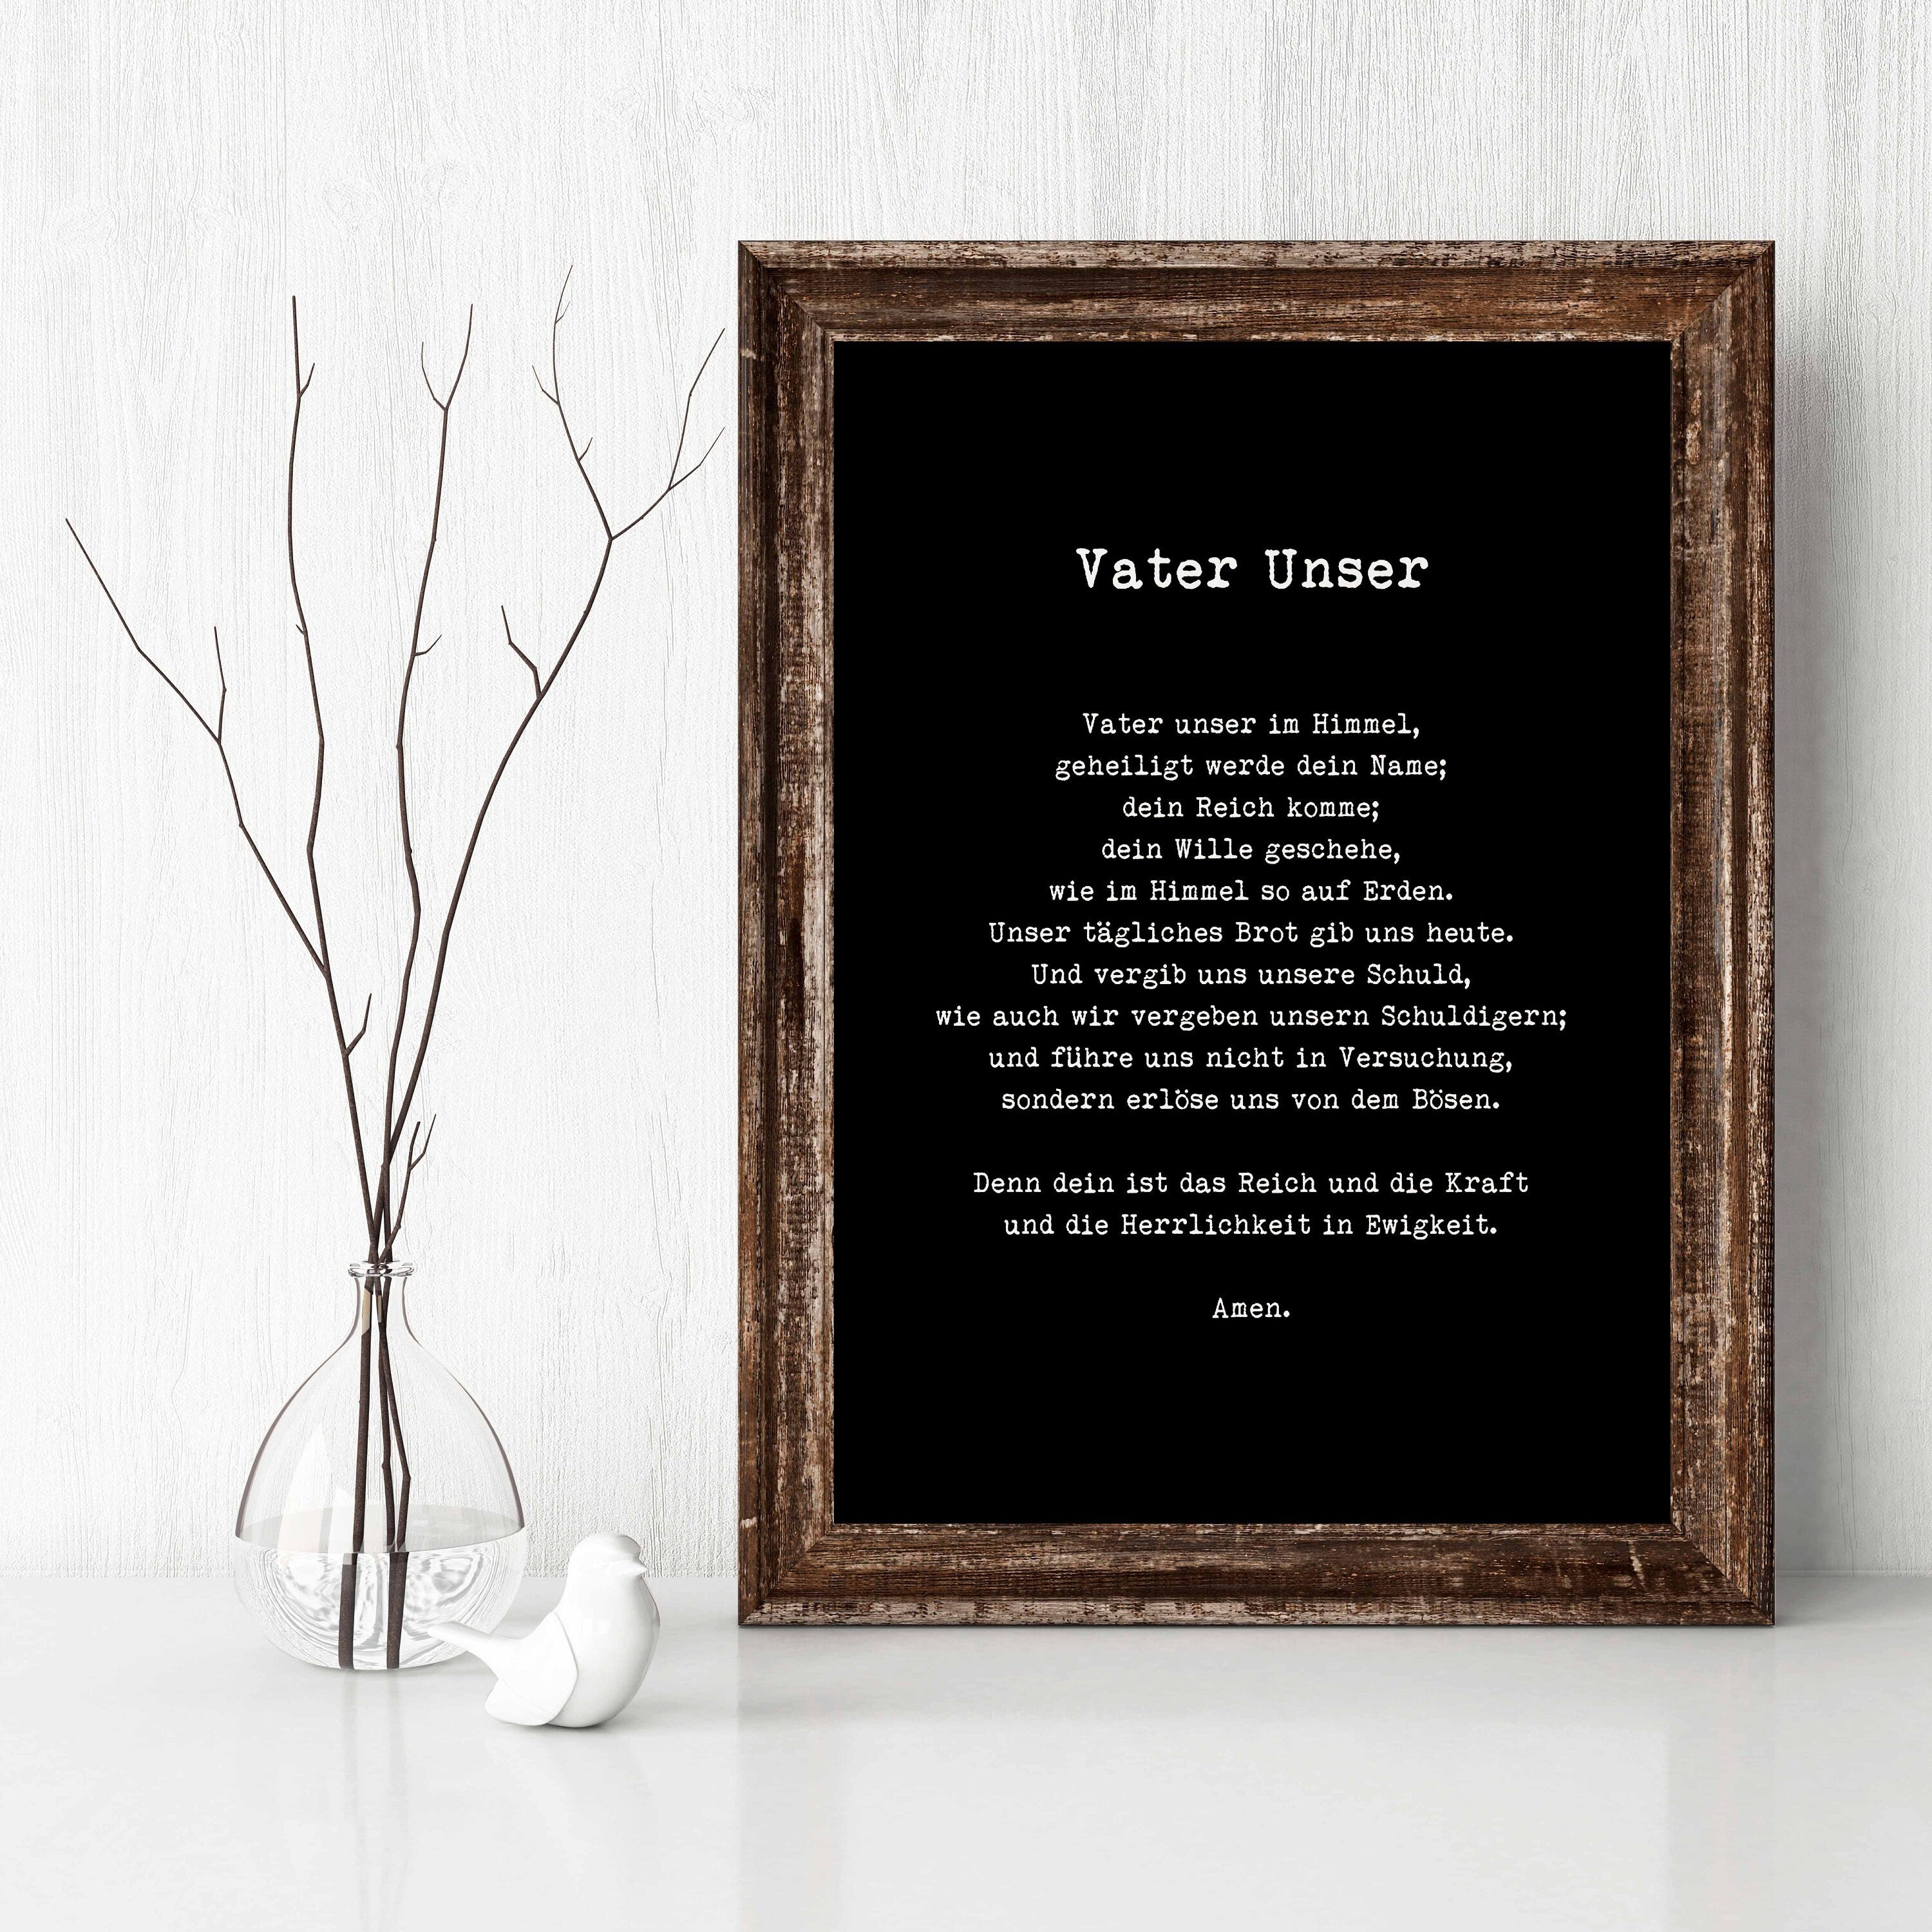 German LORD's Prayer Unframed and Framed Quote Print in Vintage Style, Vater Unser Our Father Prayer Christian Wall Art Inspirational Quote